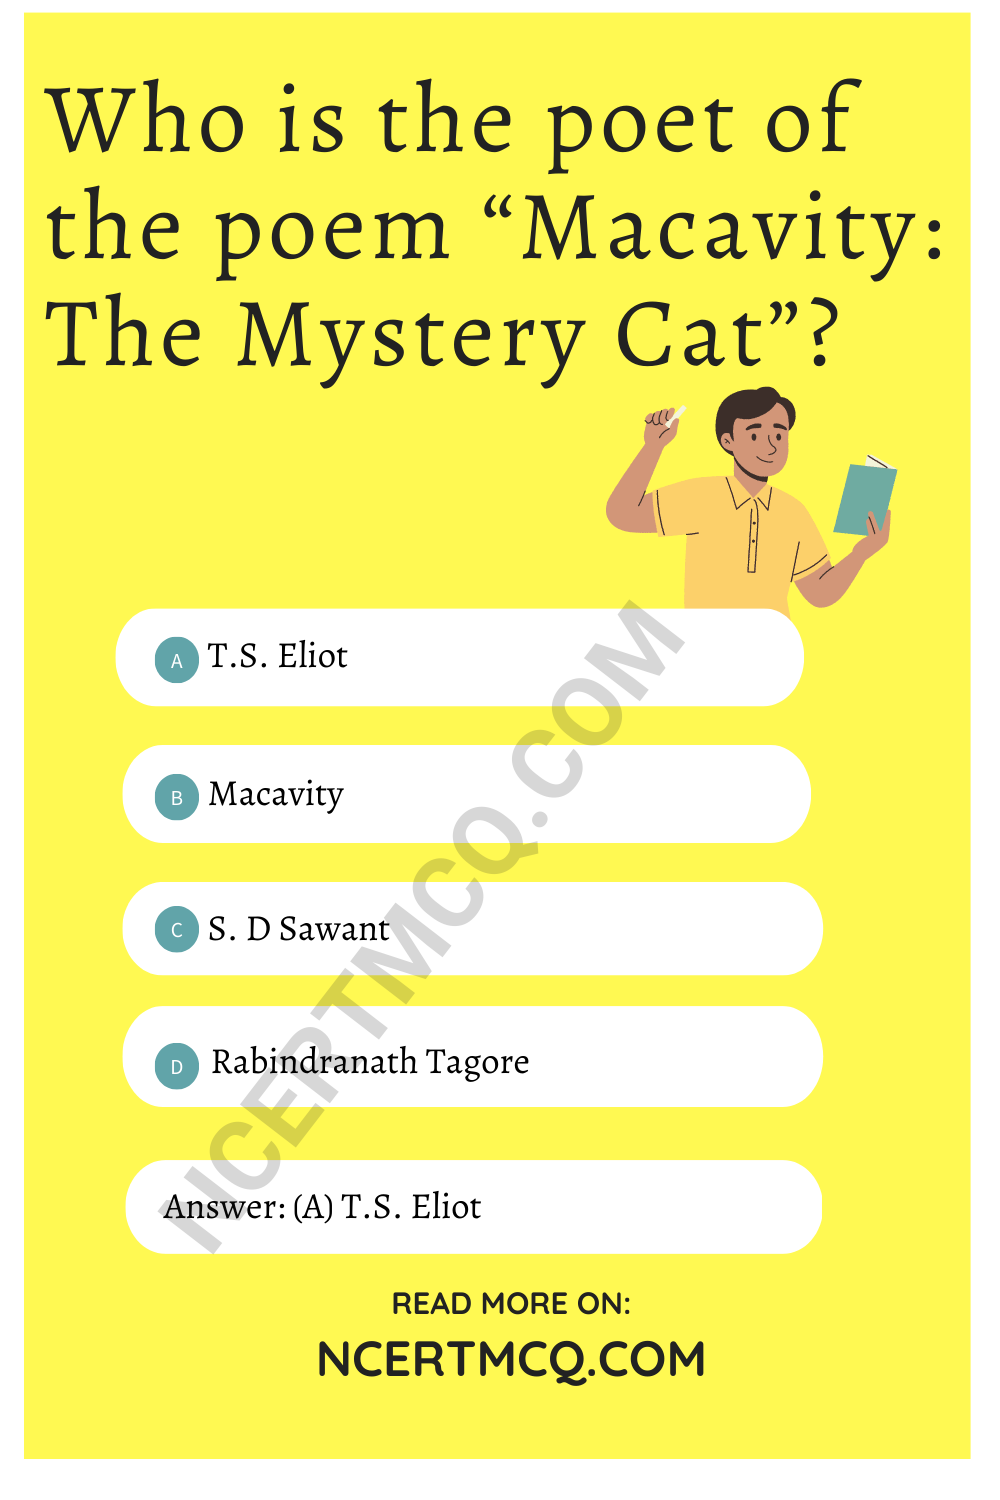 Who is the poet of the poem “Macavity: The Mystery Cat”?